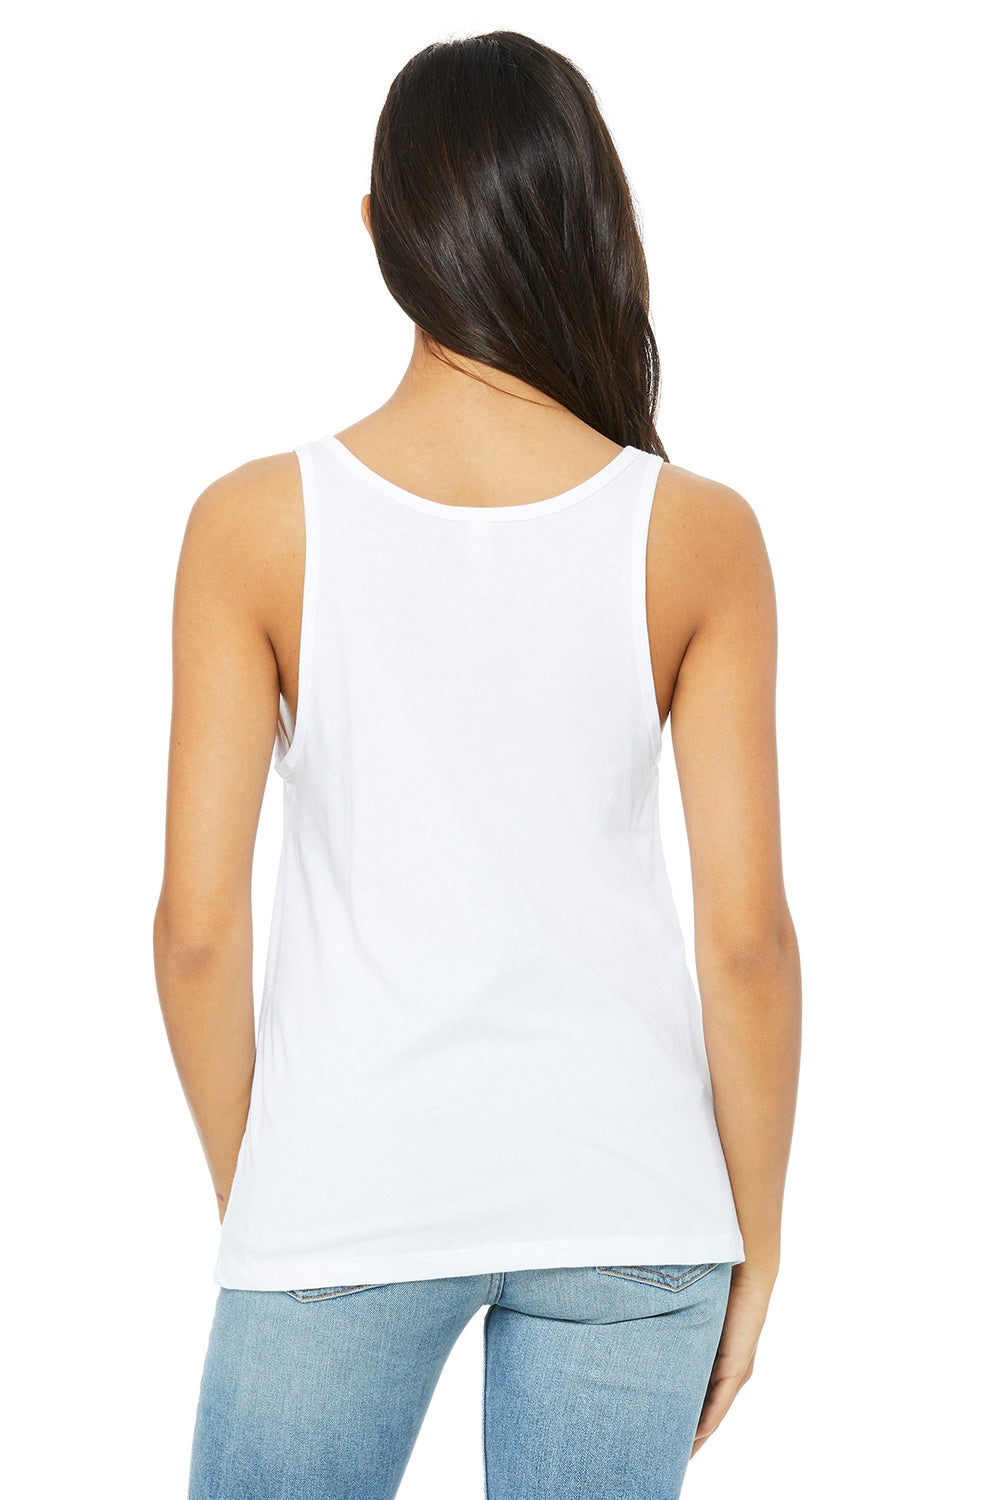 Bella + Canvas 6488 Womens Relaxed Jersey Tank Top White Back